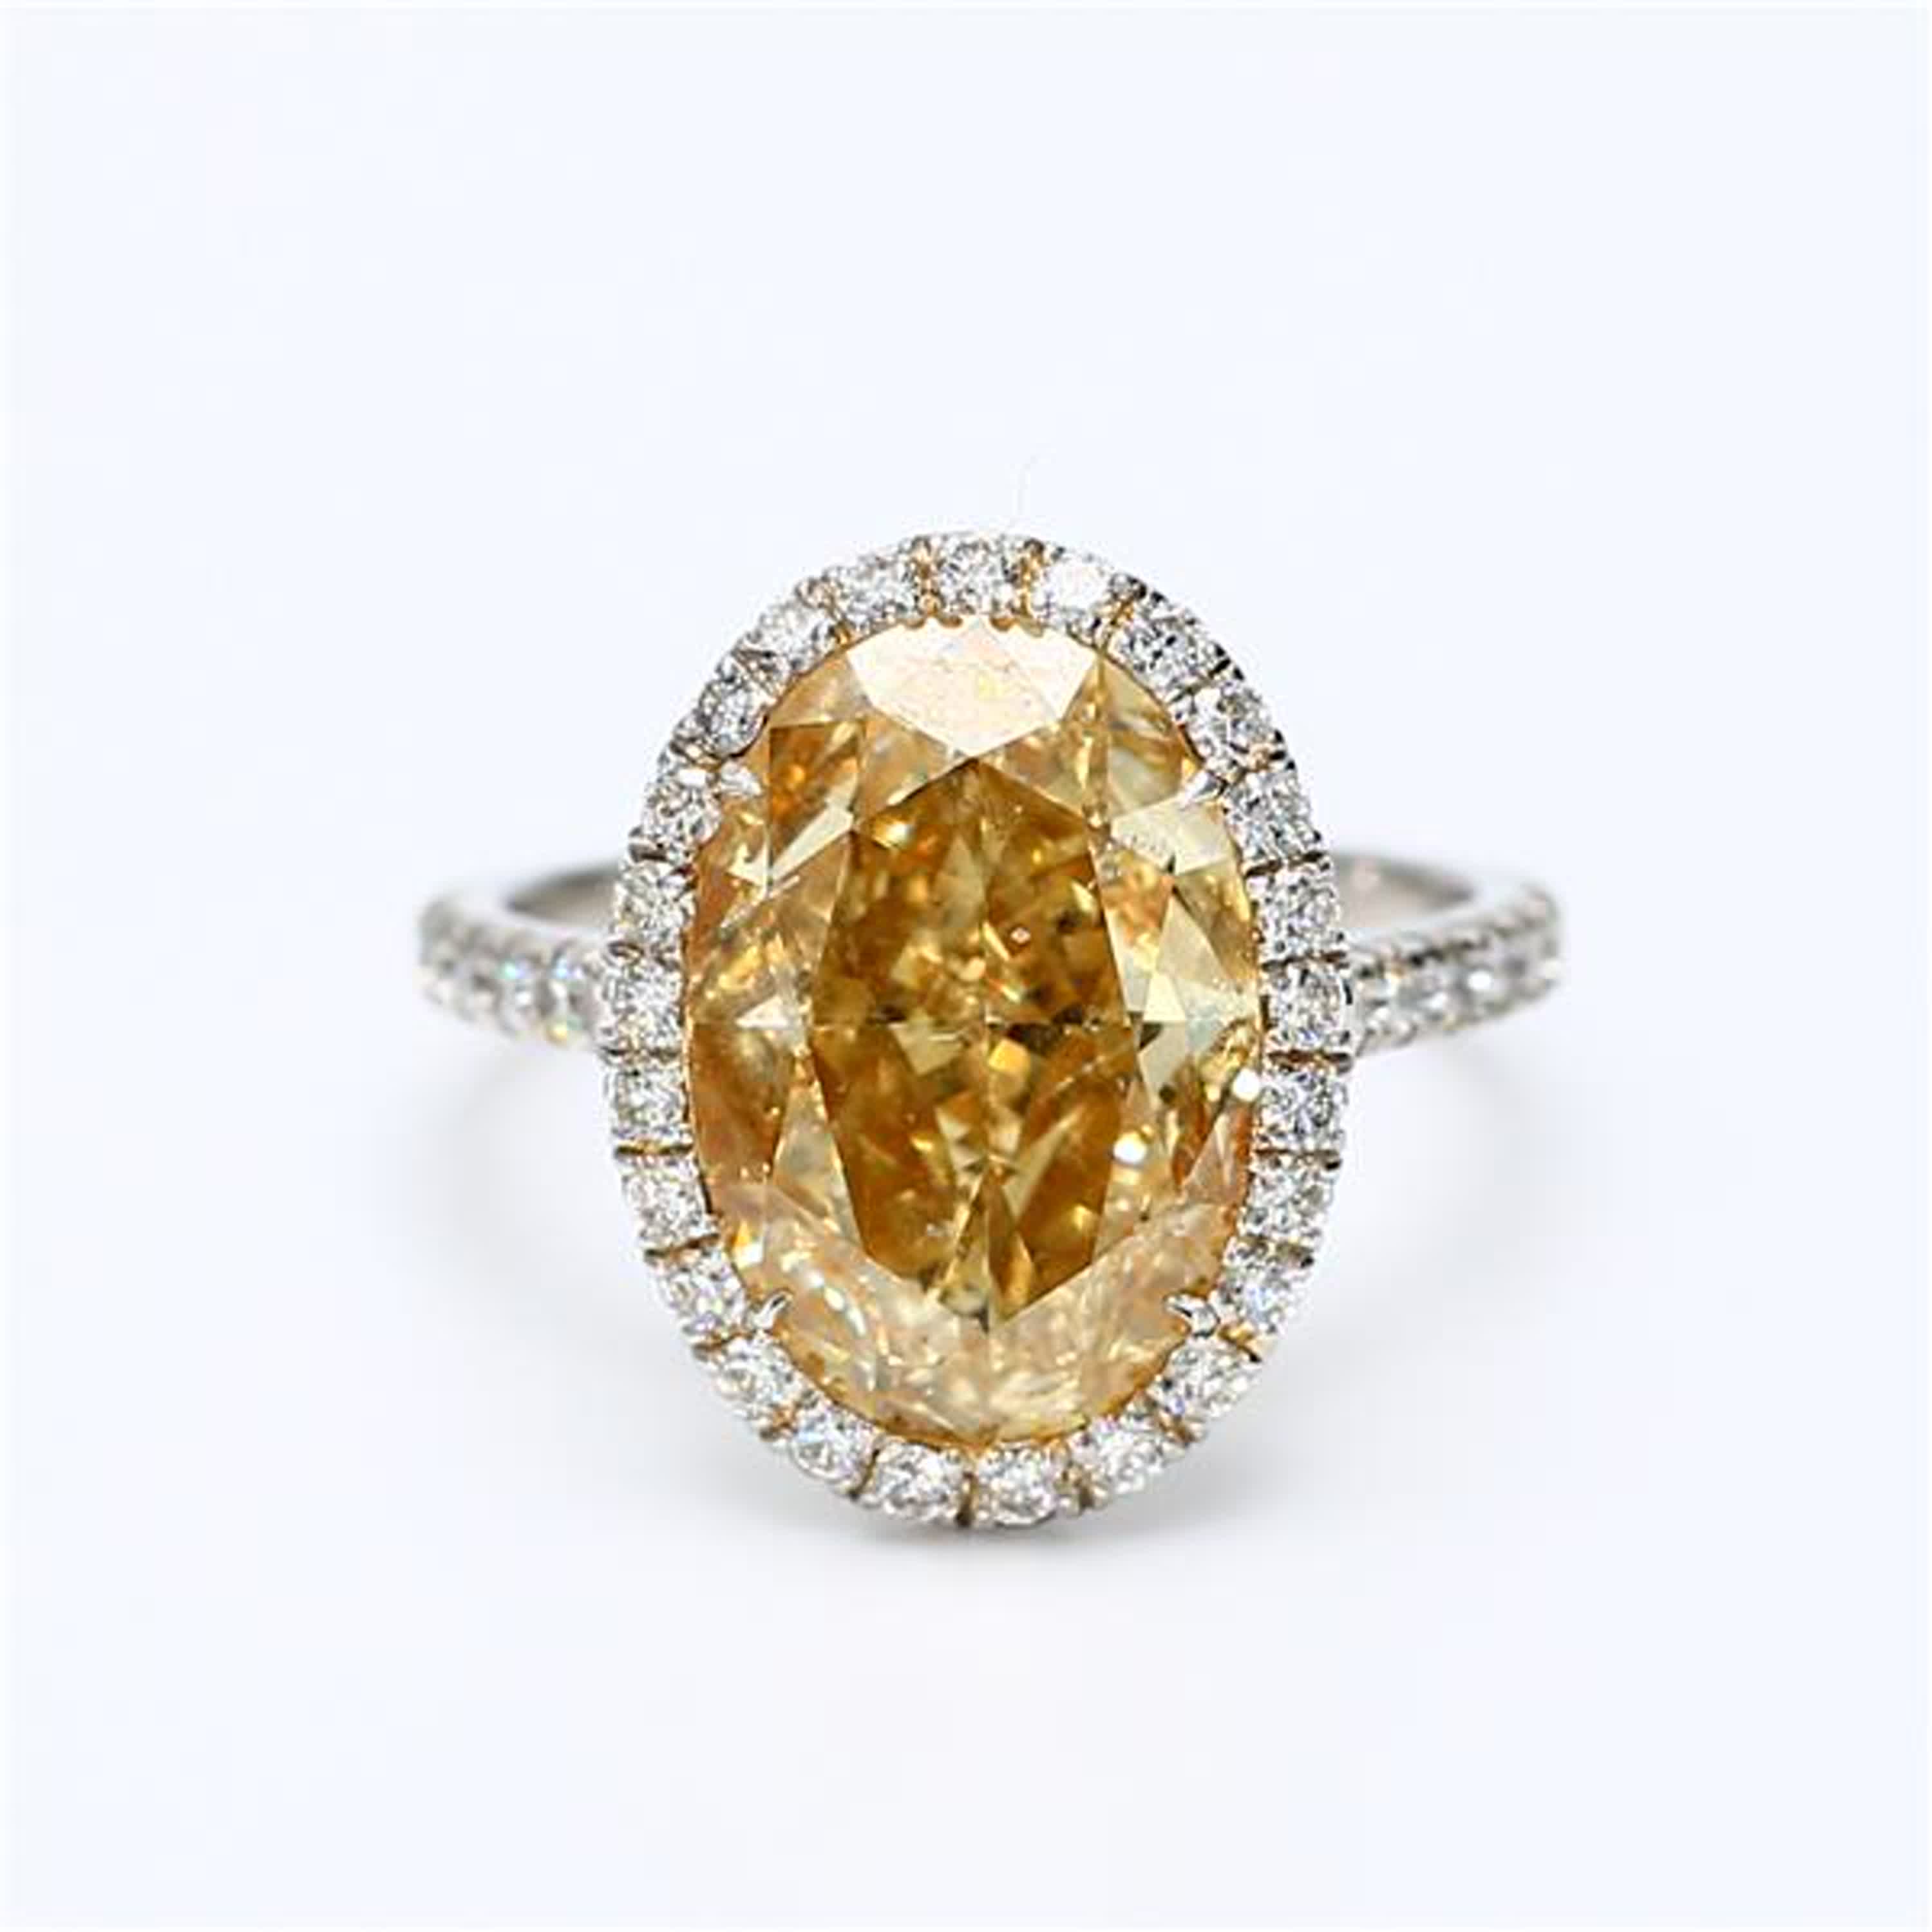 GIA Certified Natural Yellow Oval and White Diamond 5.68 Carat TW Platinum Ring